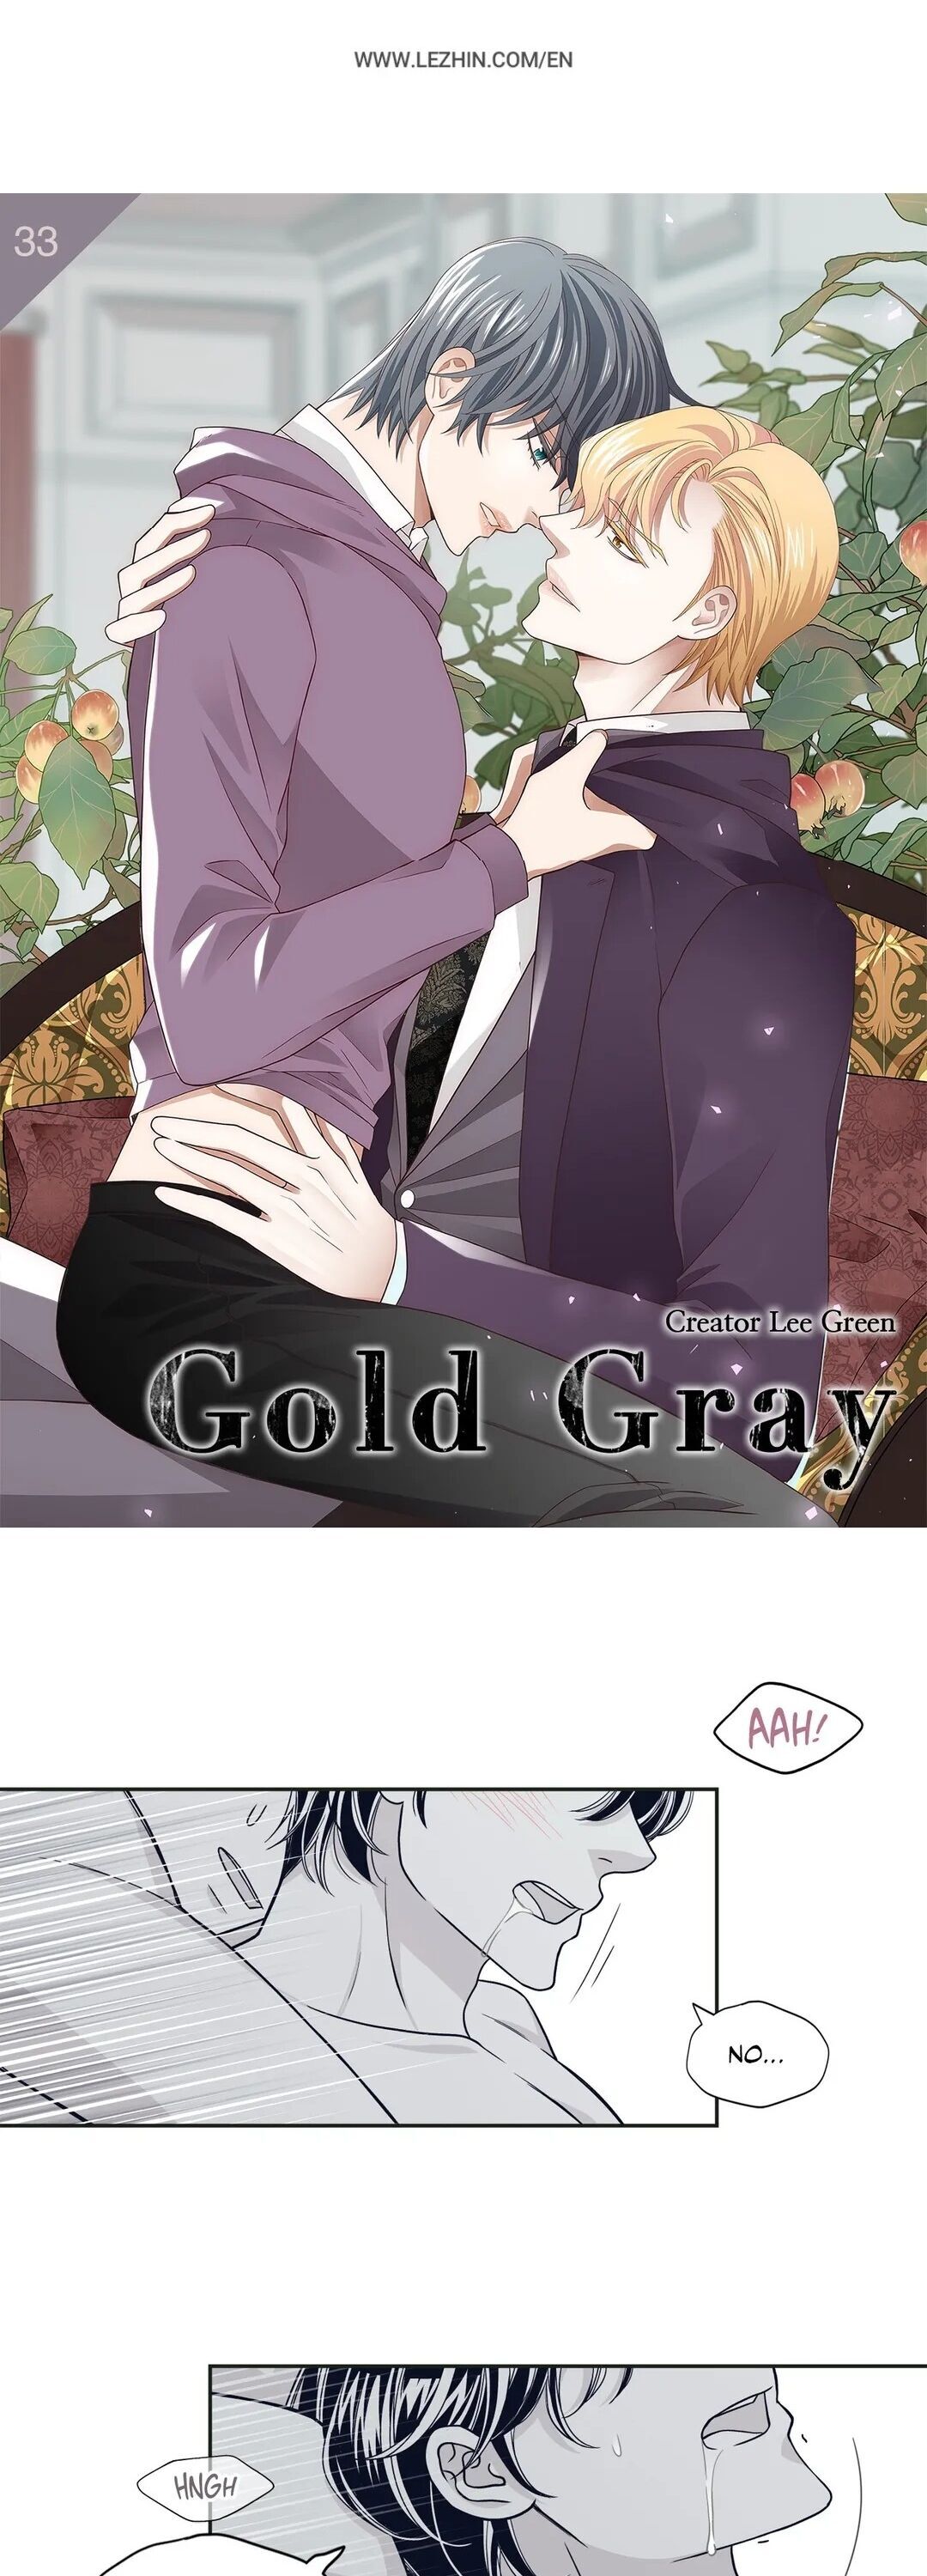 Gold Gray - Page 2